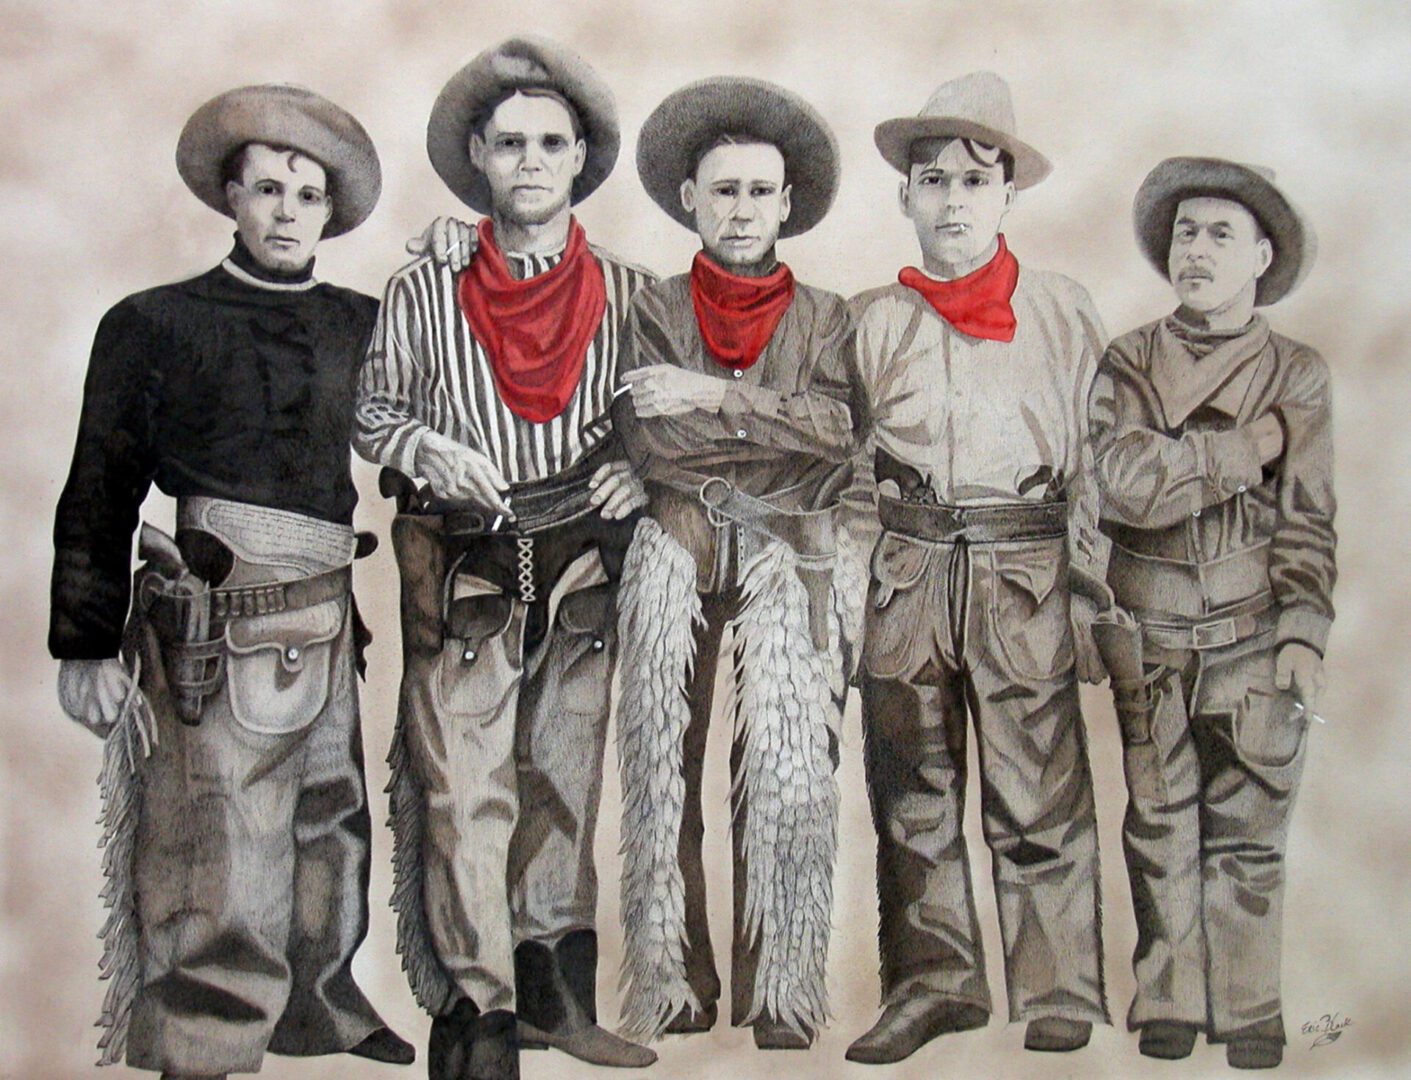 A group of men in cowboy outfits standing next to each other.